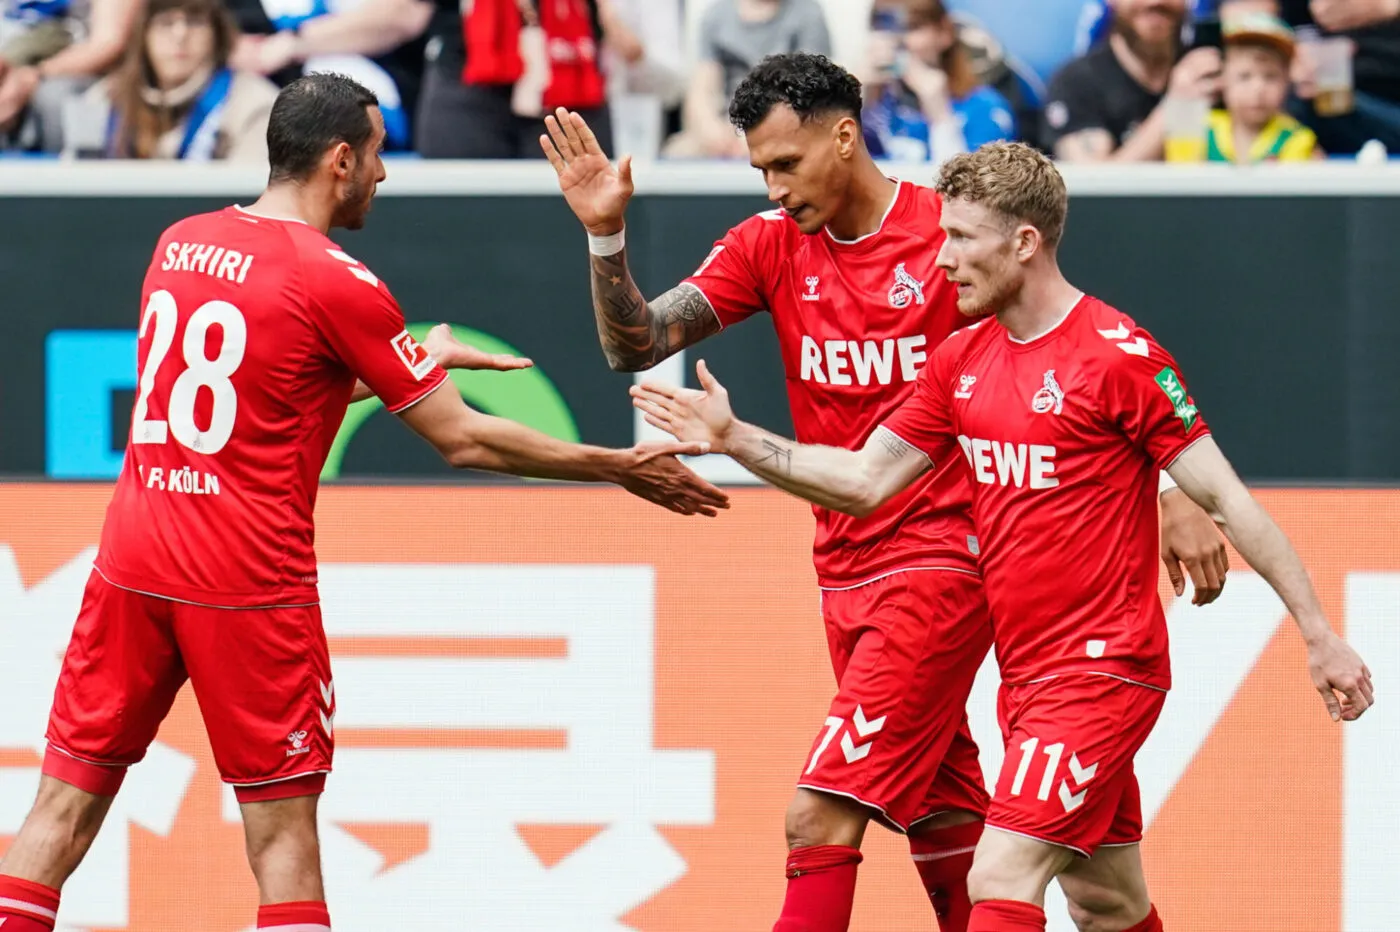 22 April 2023, Baden-Wrttemberg, Sinsheim: Soccer: Bundesliga, TSG 1899 Hoffenheim - 1. FC Kln, Matchday 29, PreZero Arena. Cologne's Ellyes Skhiri (l-r), Cologne's goal scorer Davie Selke and Cologne's Florian Kainz celebrate the goal for 0:2. Photo: Uwe Anspach/dpa - IMPORTANT NOTE: In accordance with the requirements of the DFL Deutsche Fuball Liga and the DFB Deutscher Fuball-Bund, it is prohibited to use or have used photographs taken in the stadium and/or of the match in the form of sequence pictures and/or video-like photo series. - Photo by Icon sport